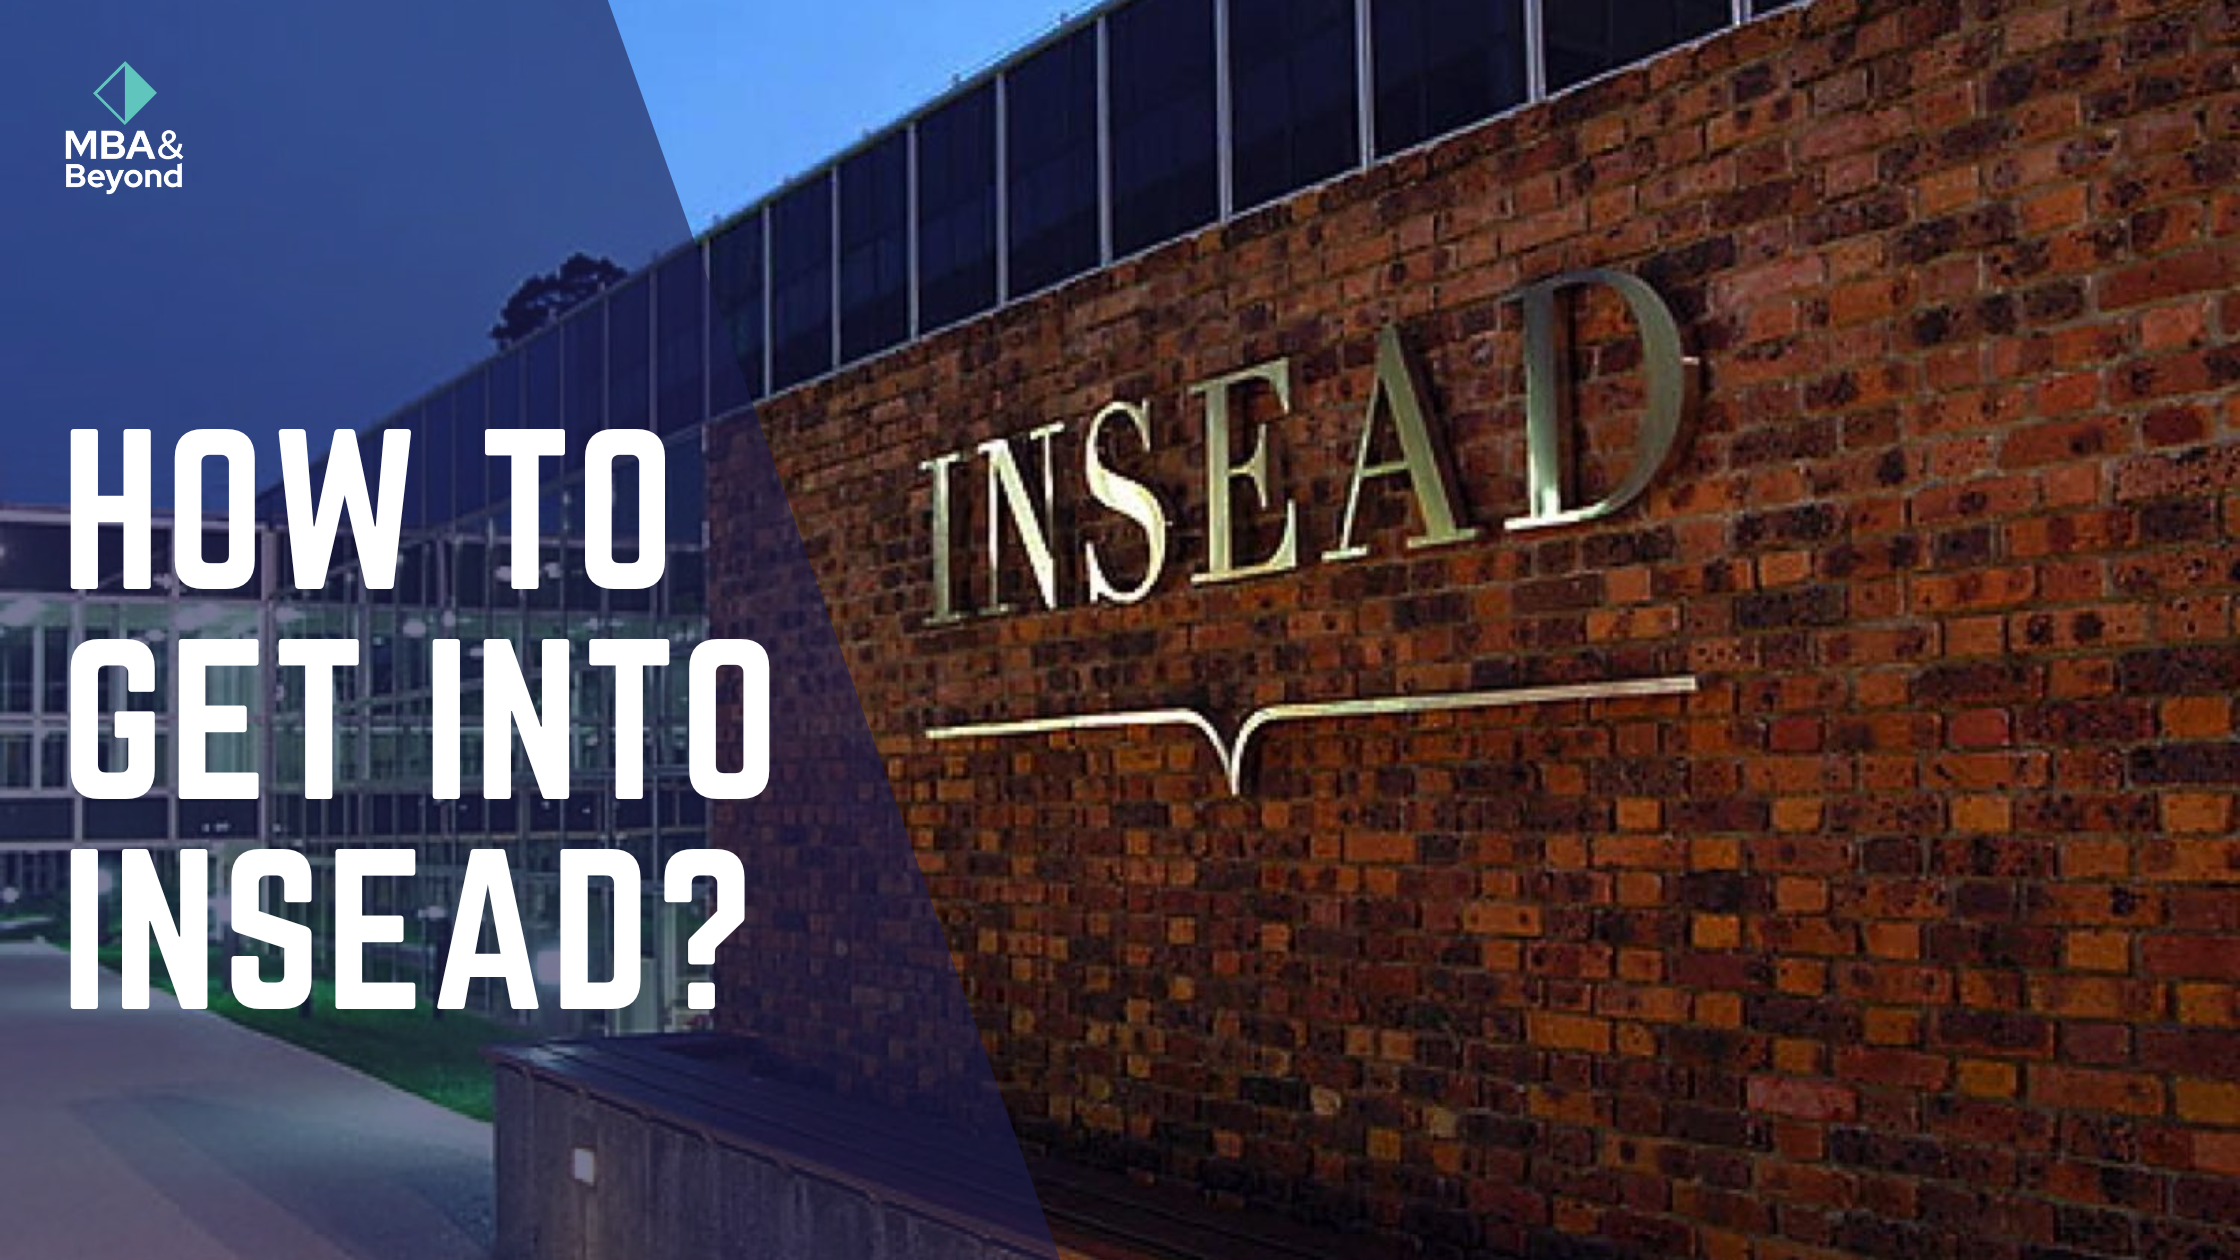 How to get into INSEAD?